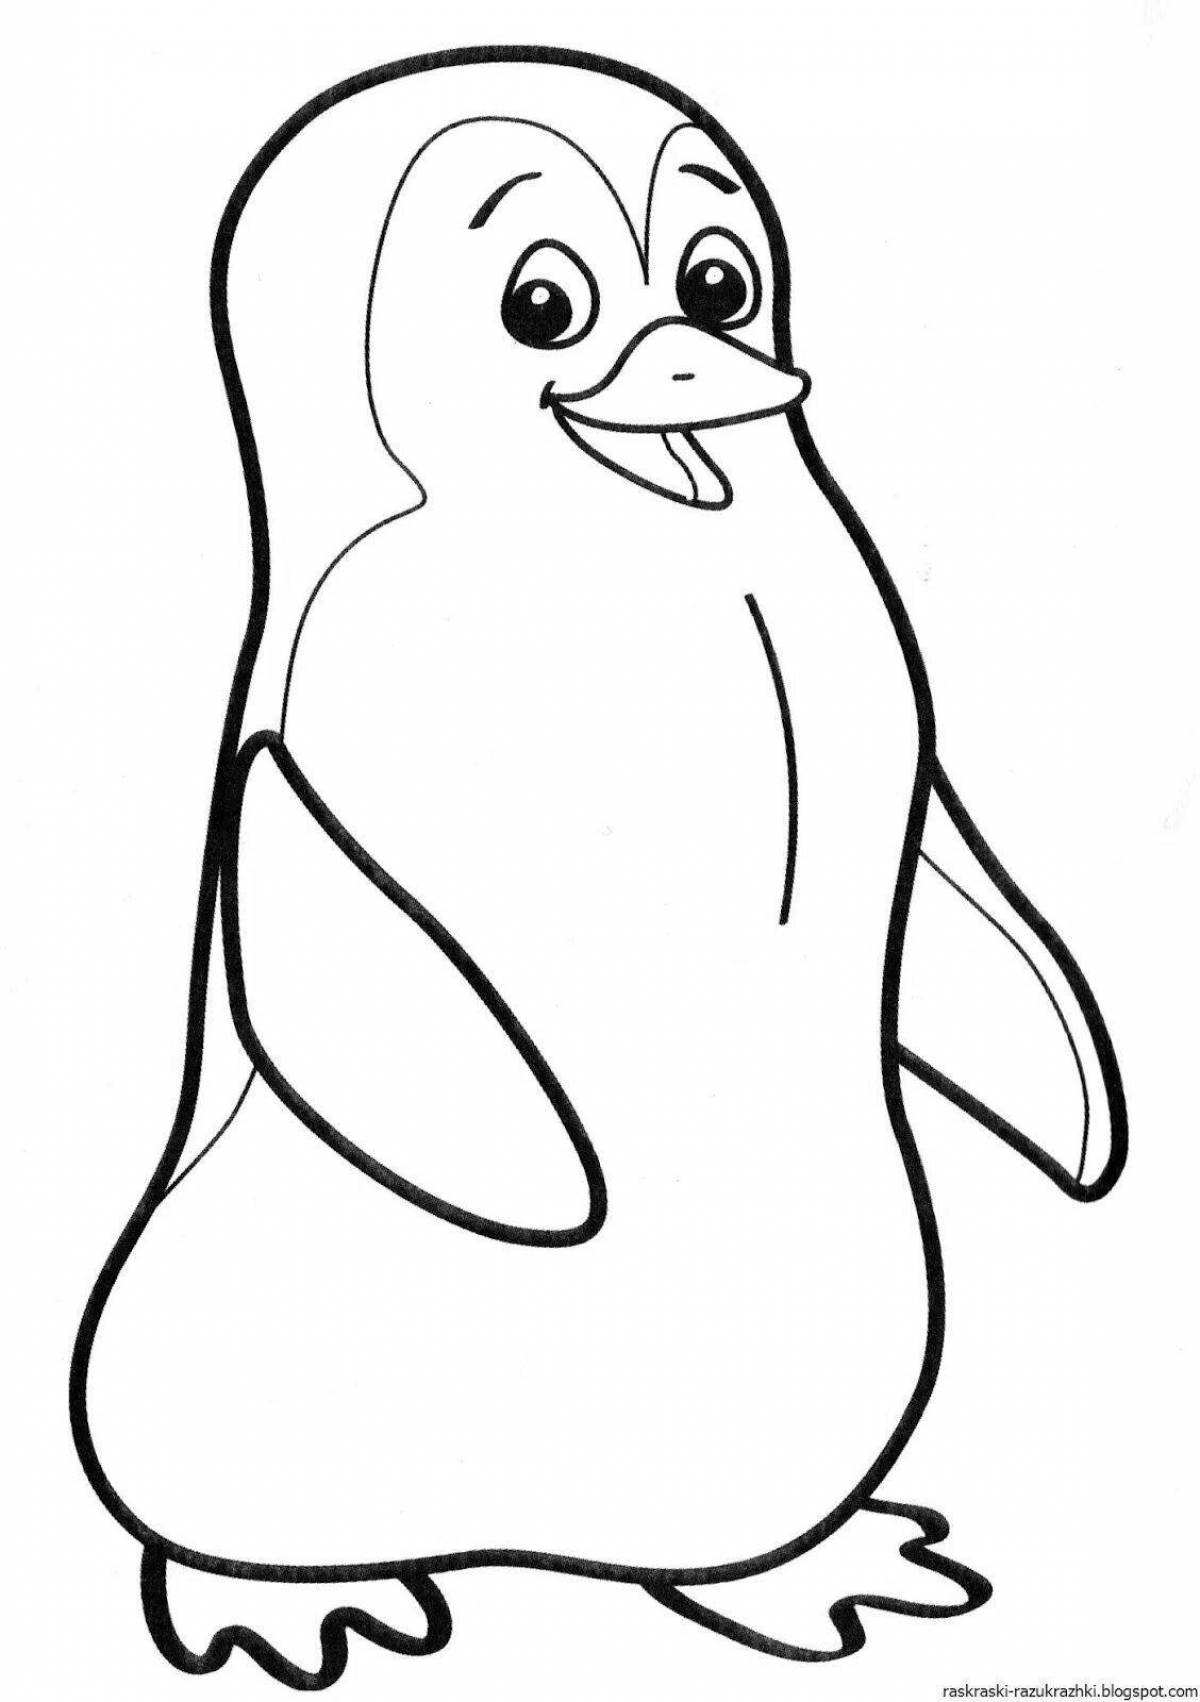 Exciting penguin coloring book